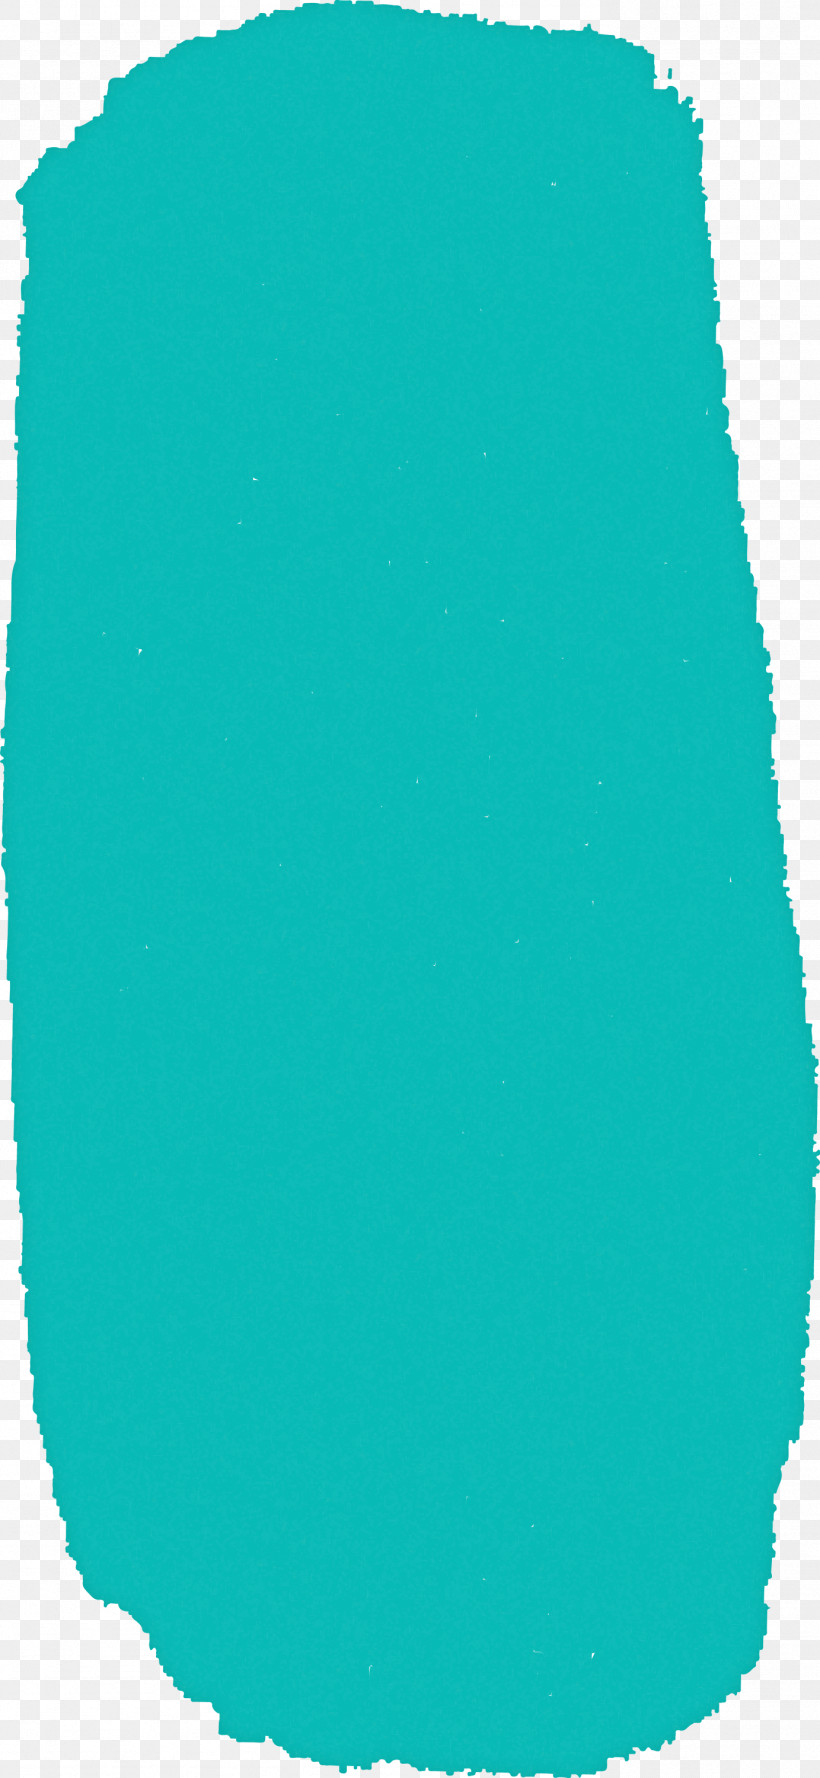 Green Aqua Turquoise Blue Teal, PNG, 1383x3000px, Watercolor Background, Aqua, Blue, Green, Teal Download Free